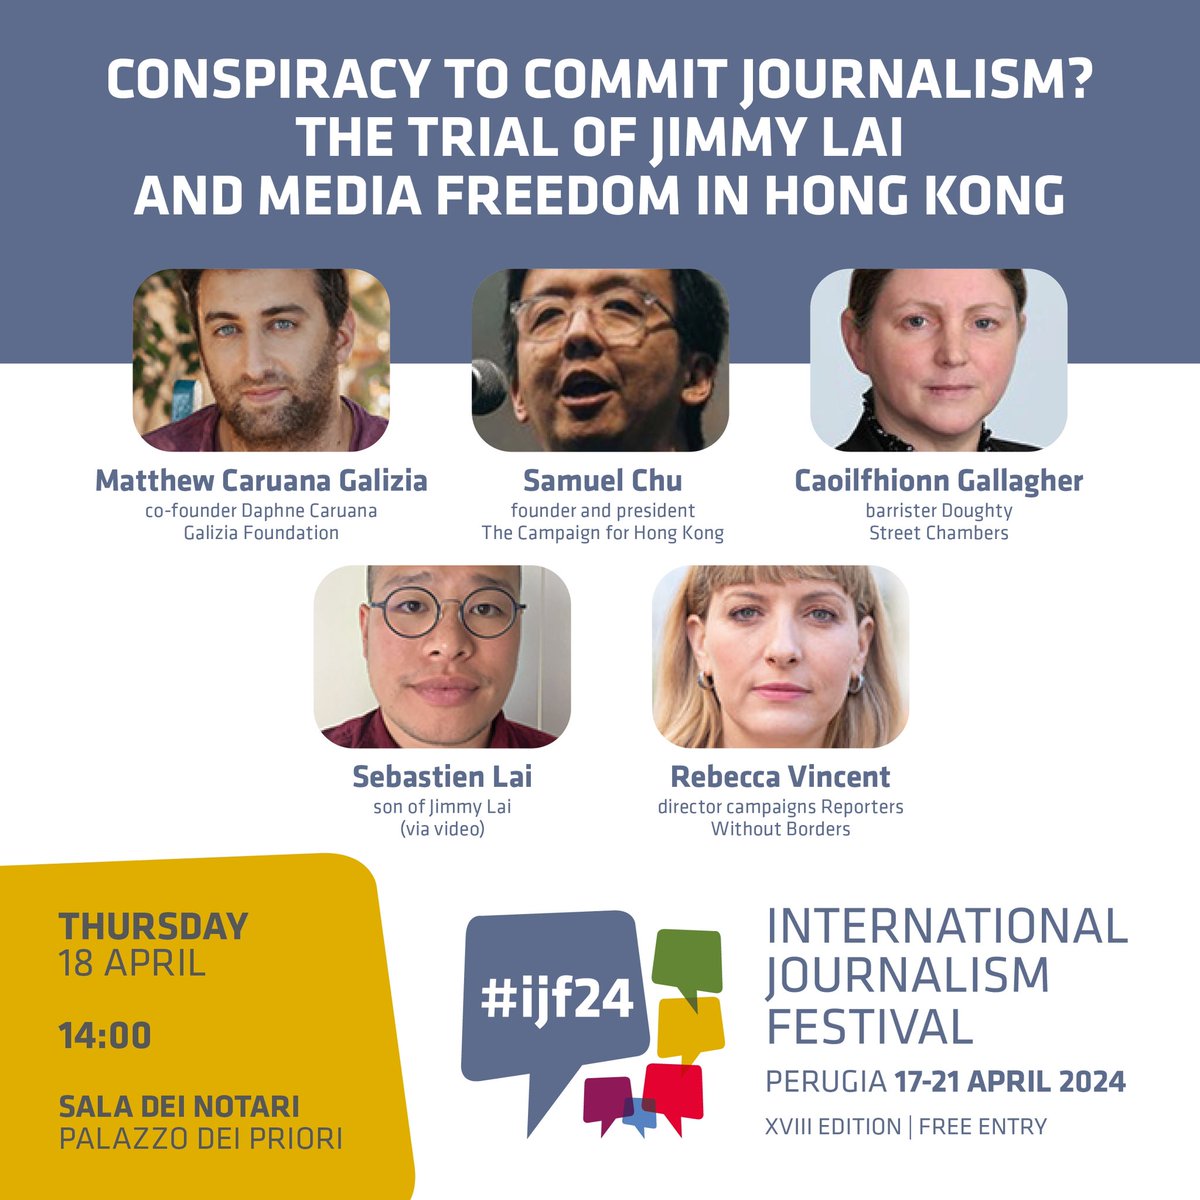 Next week #ijf24 we’ll discuss the injustice unfolding in a #HongKong courtroom & why it matters so much - for Hong Kong, the region & the world. Conspiracy to Commit Journalism: The Trial of Jimmy Lai & Media Freedom in Hong Kong 18 April, 1400 CET ▶️ journalismfestival.com/programme/2024…